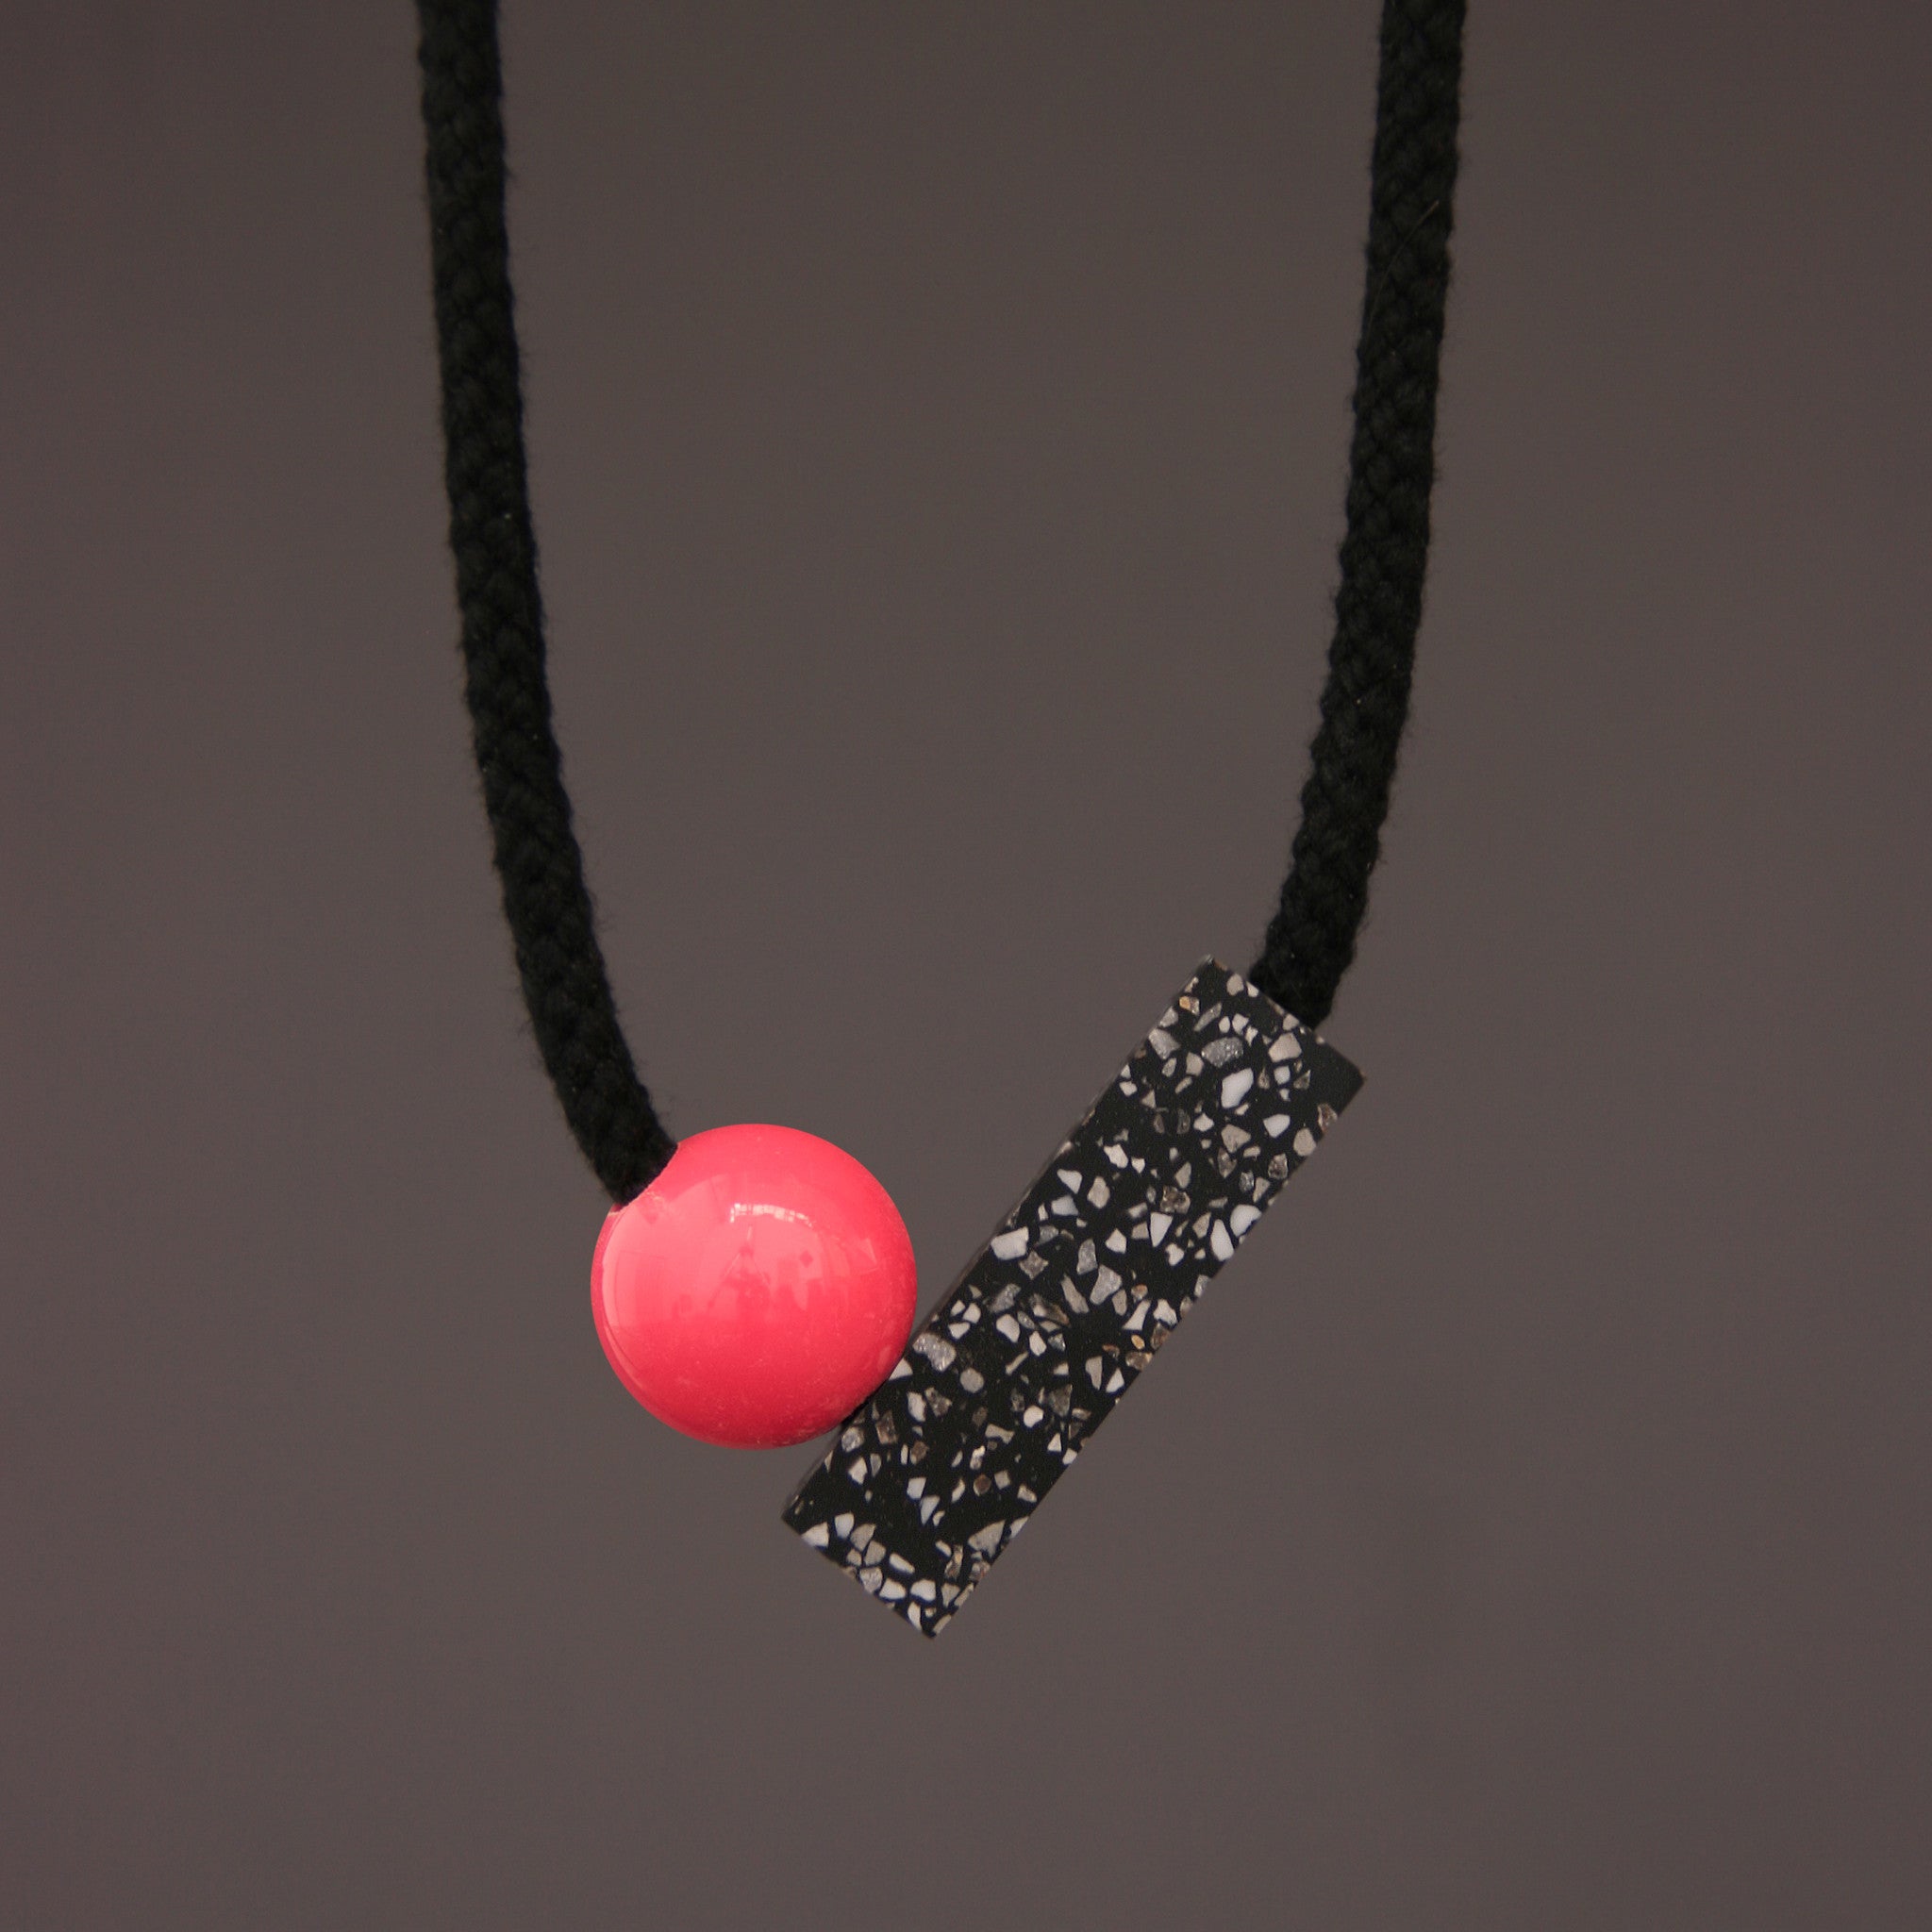 The Ad necklace is a minimalist and stylish design. It is composed of 2 main parts - A section of black corian with fine speckles of grey and white (60mm x 18mm) and a coloured ball (25mm).